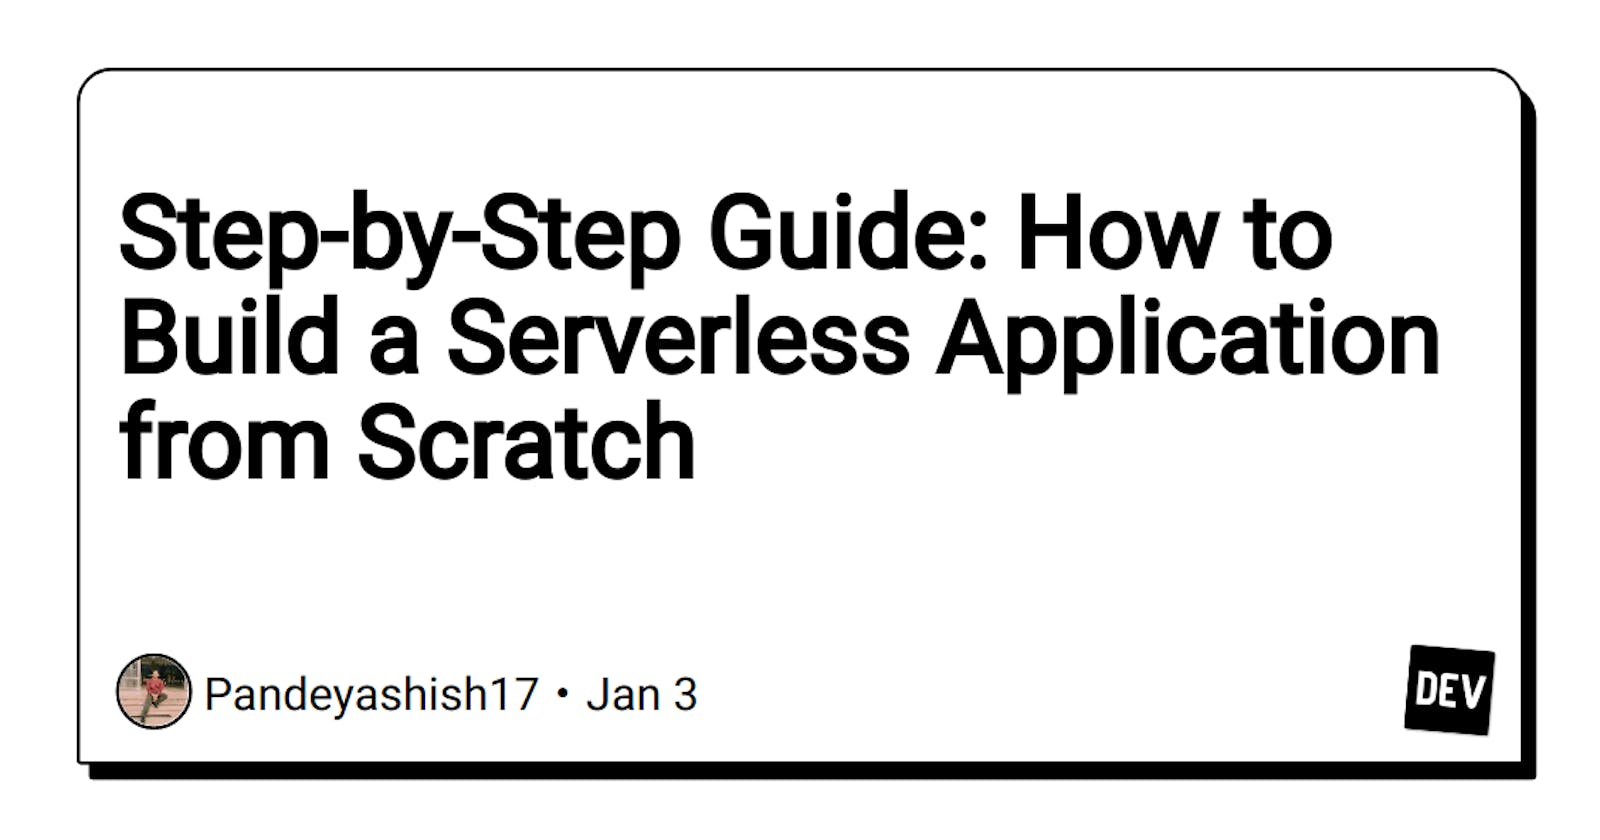 Step-by-Step Guide: How to Build a Serverless Application from Scratch